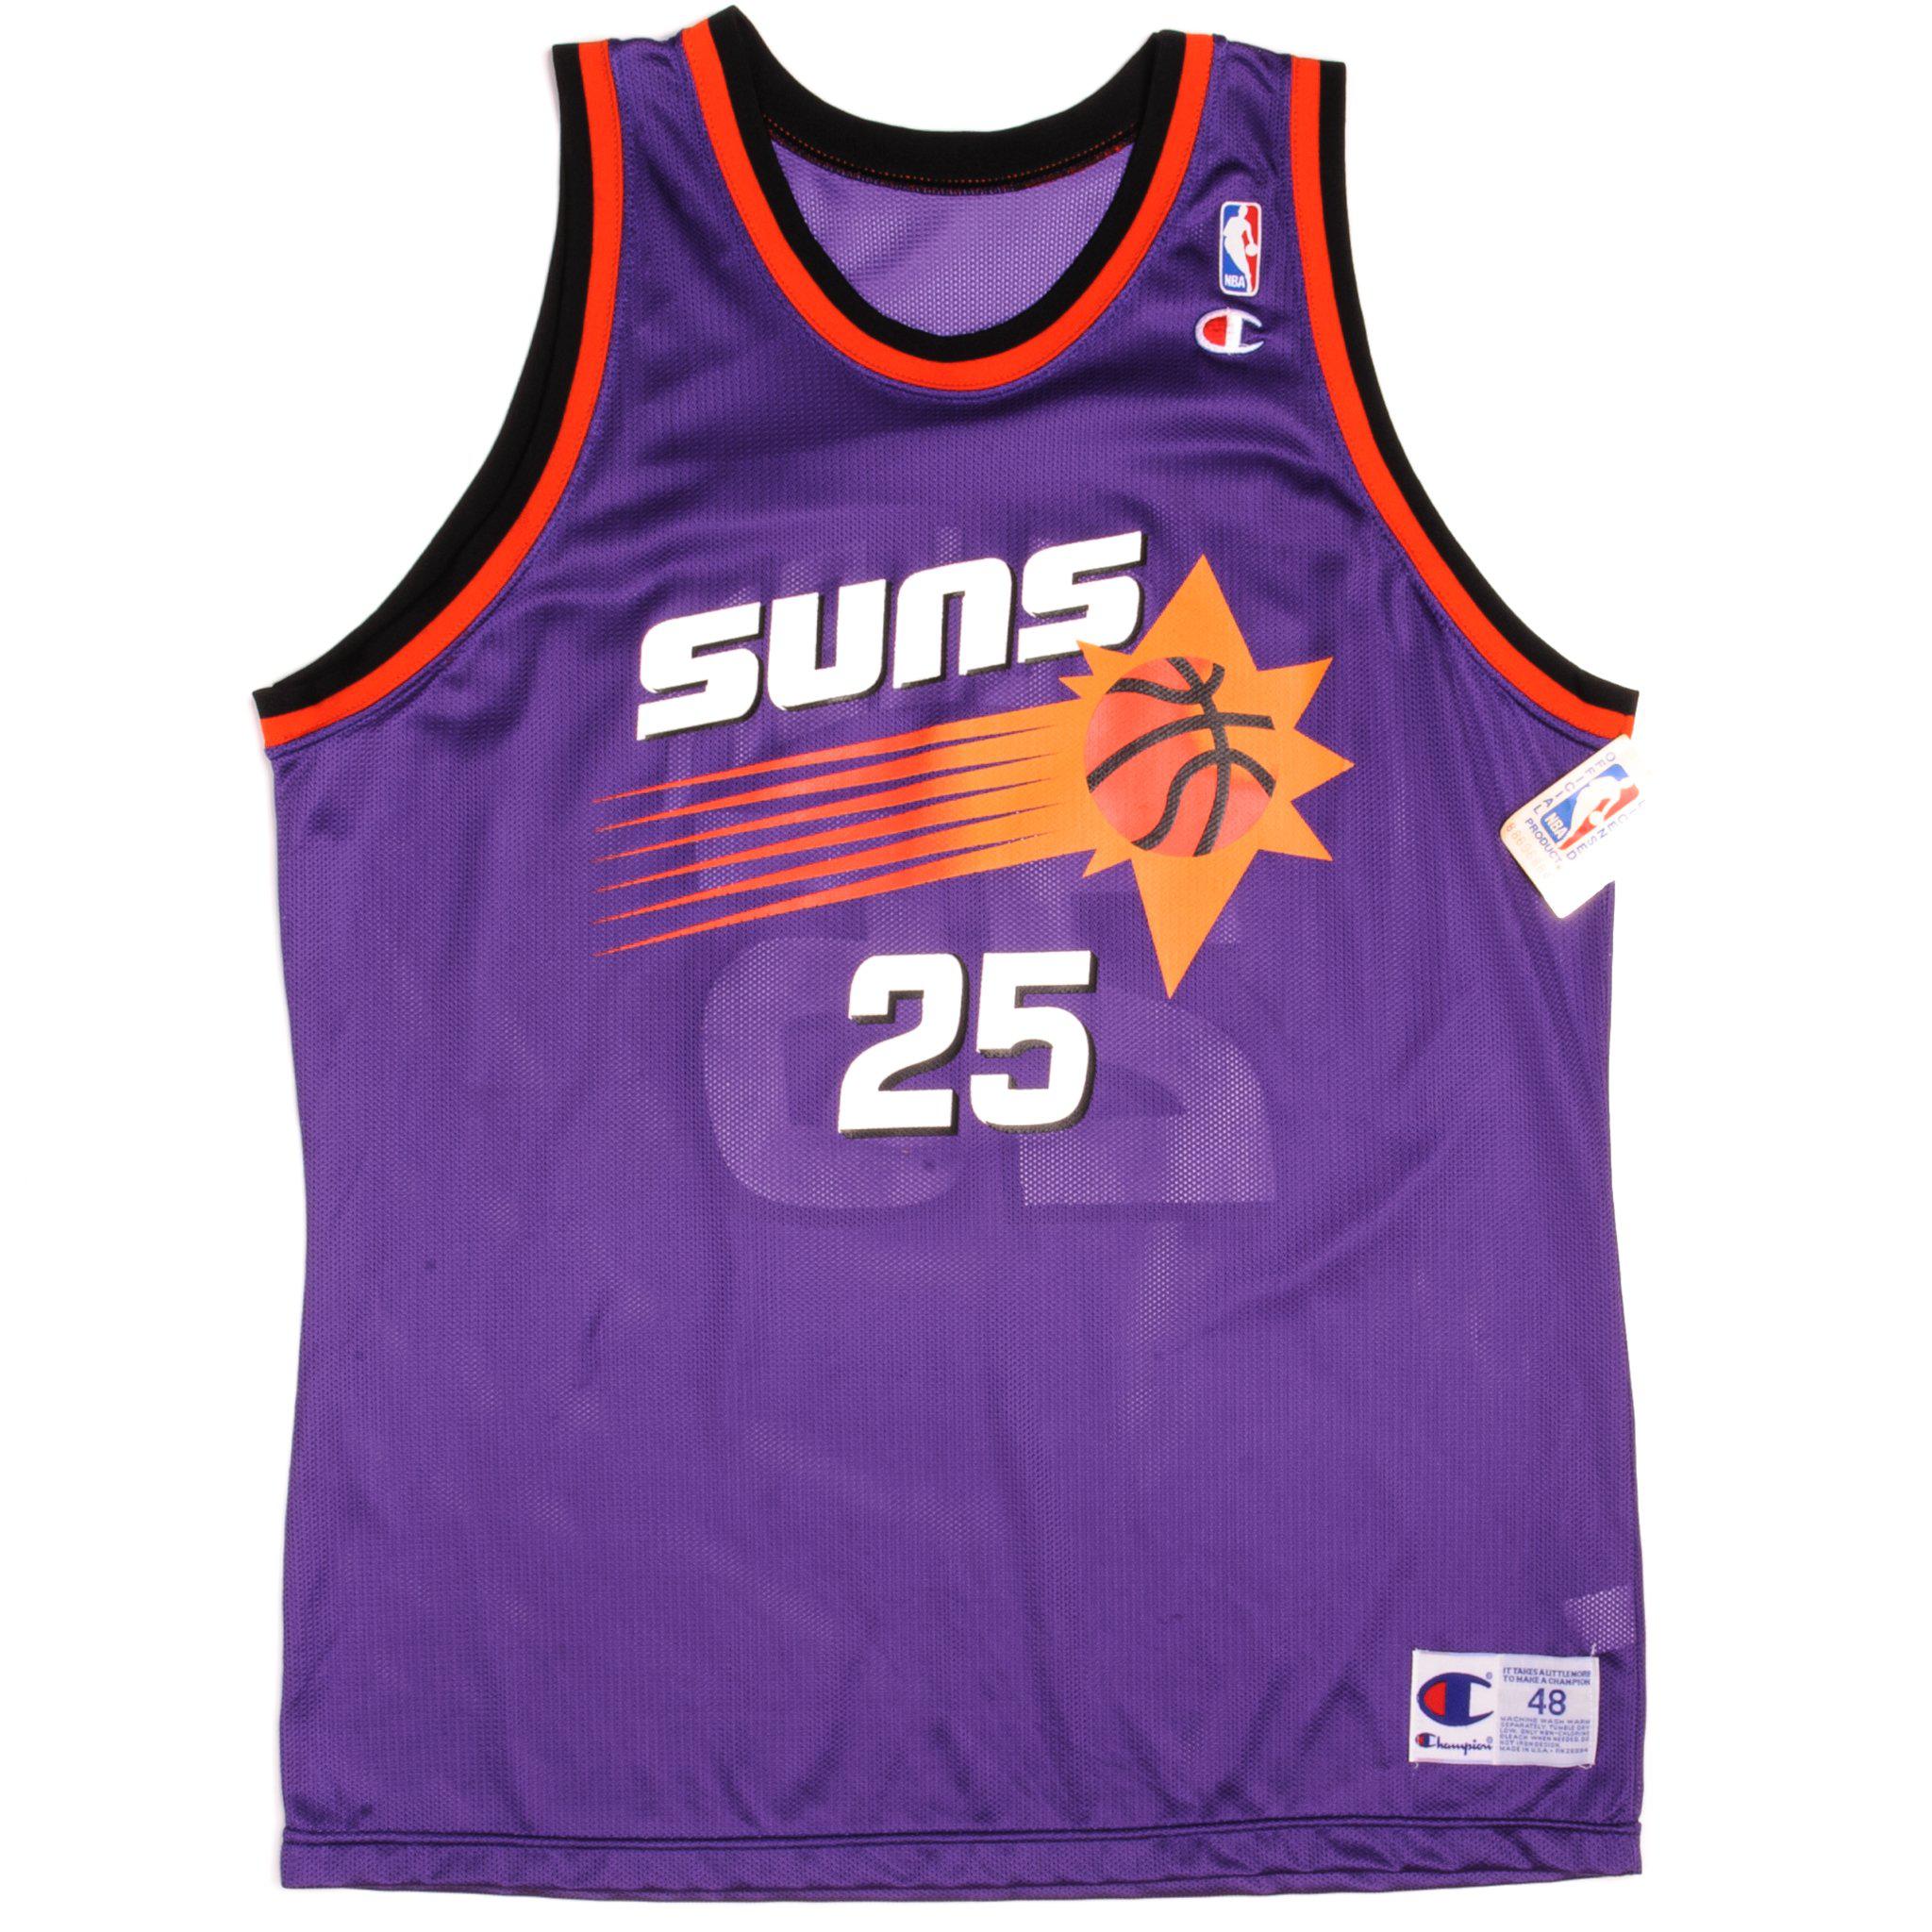 VINTAGE CHAMPION NBA PHOENIX SUNS Miller #25 JERSEY 1990s SIZE 48 MADE IN  USA DEADSTOCK